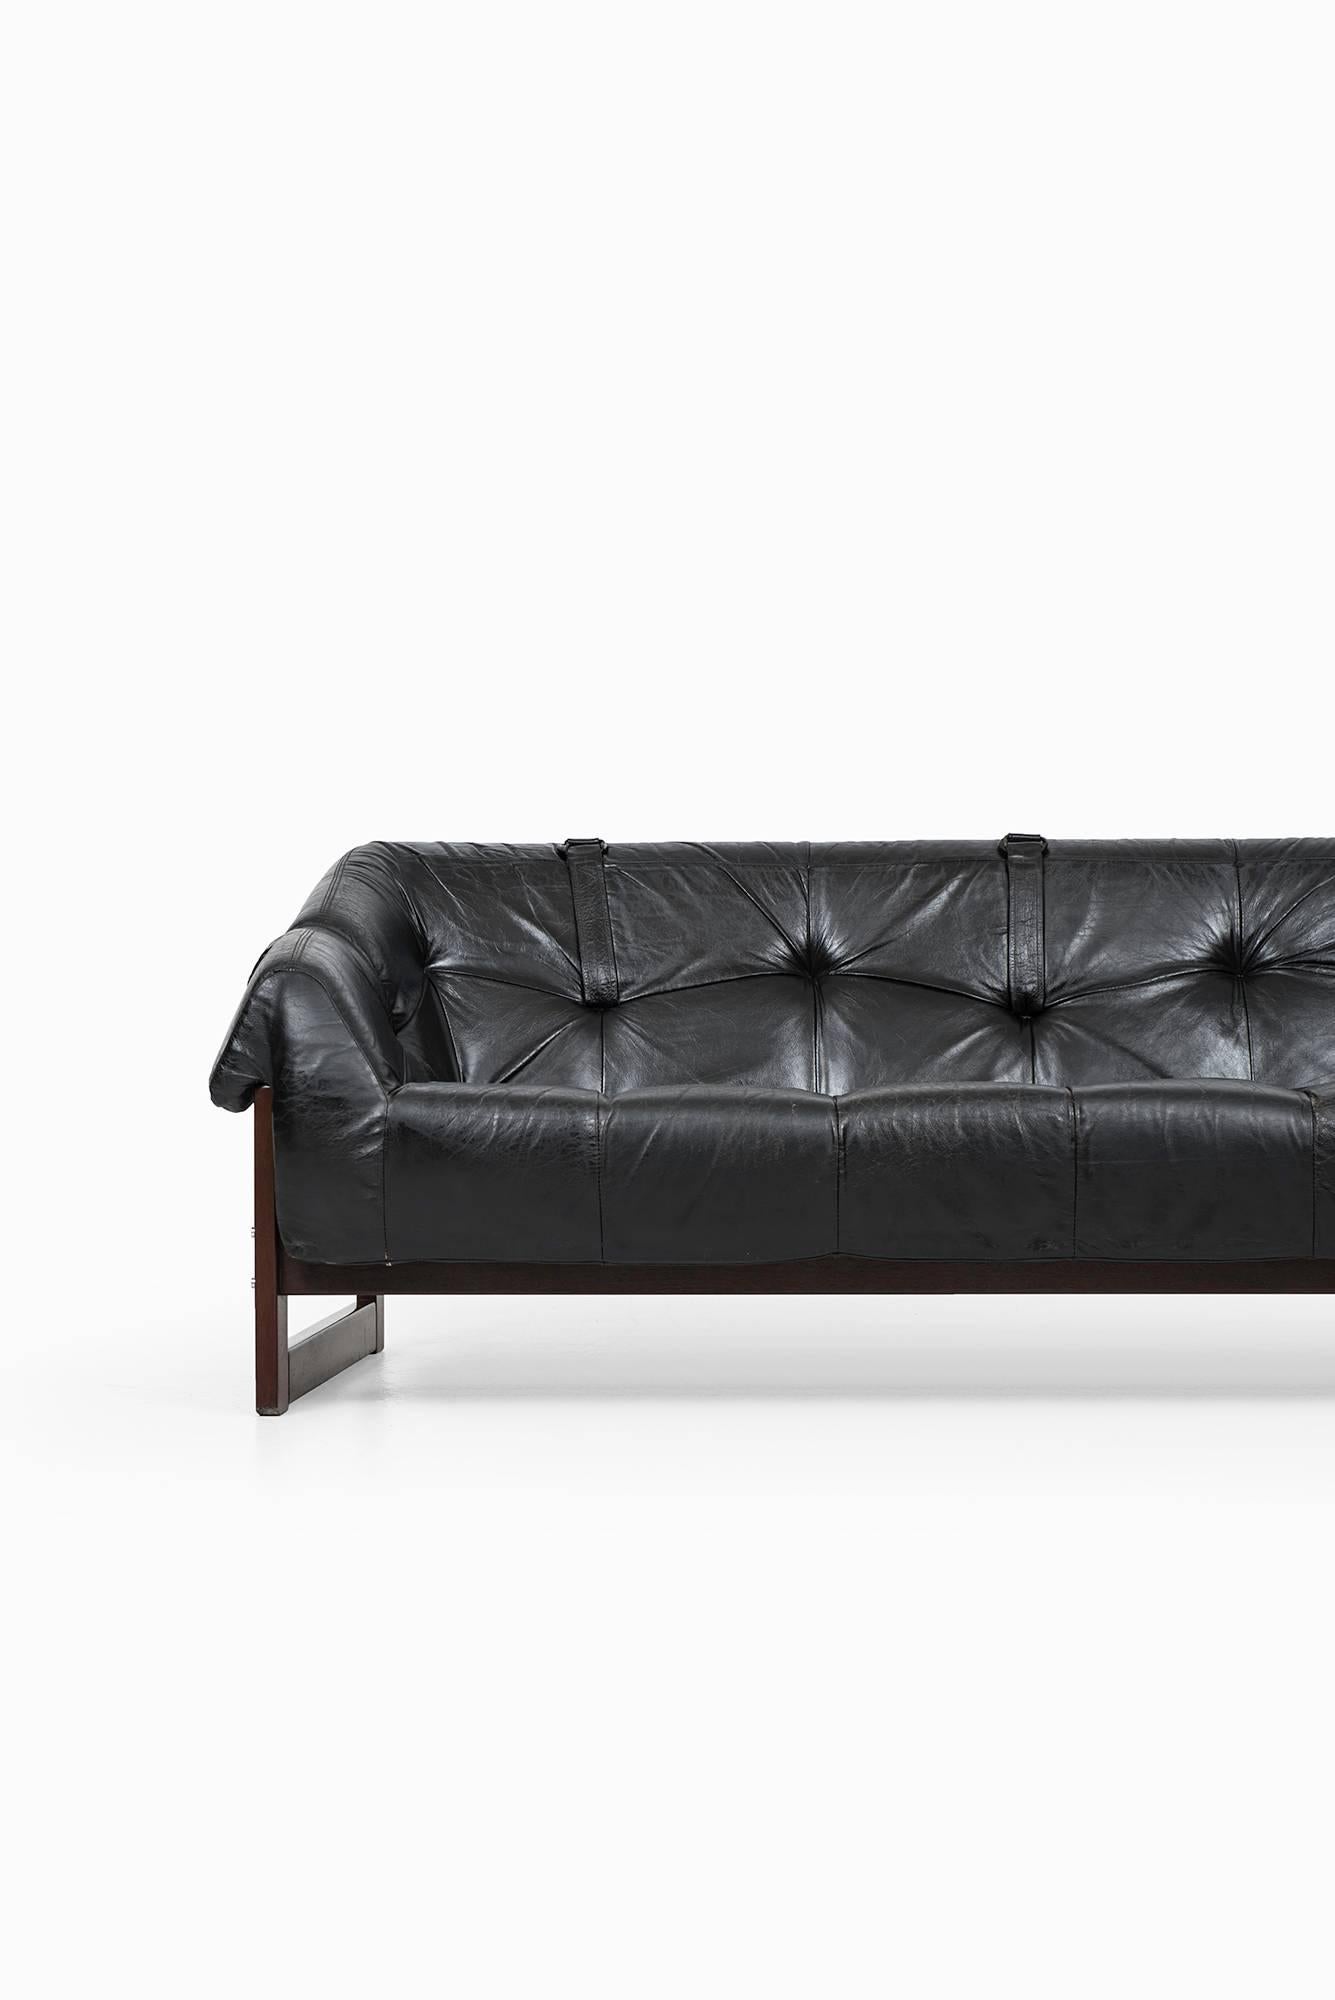 Percival Lafer Three-Seat Sofa in Black Leather by Lafer MP in Brazil 3